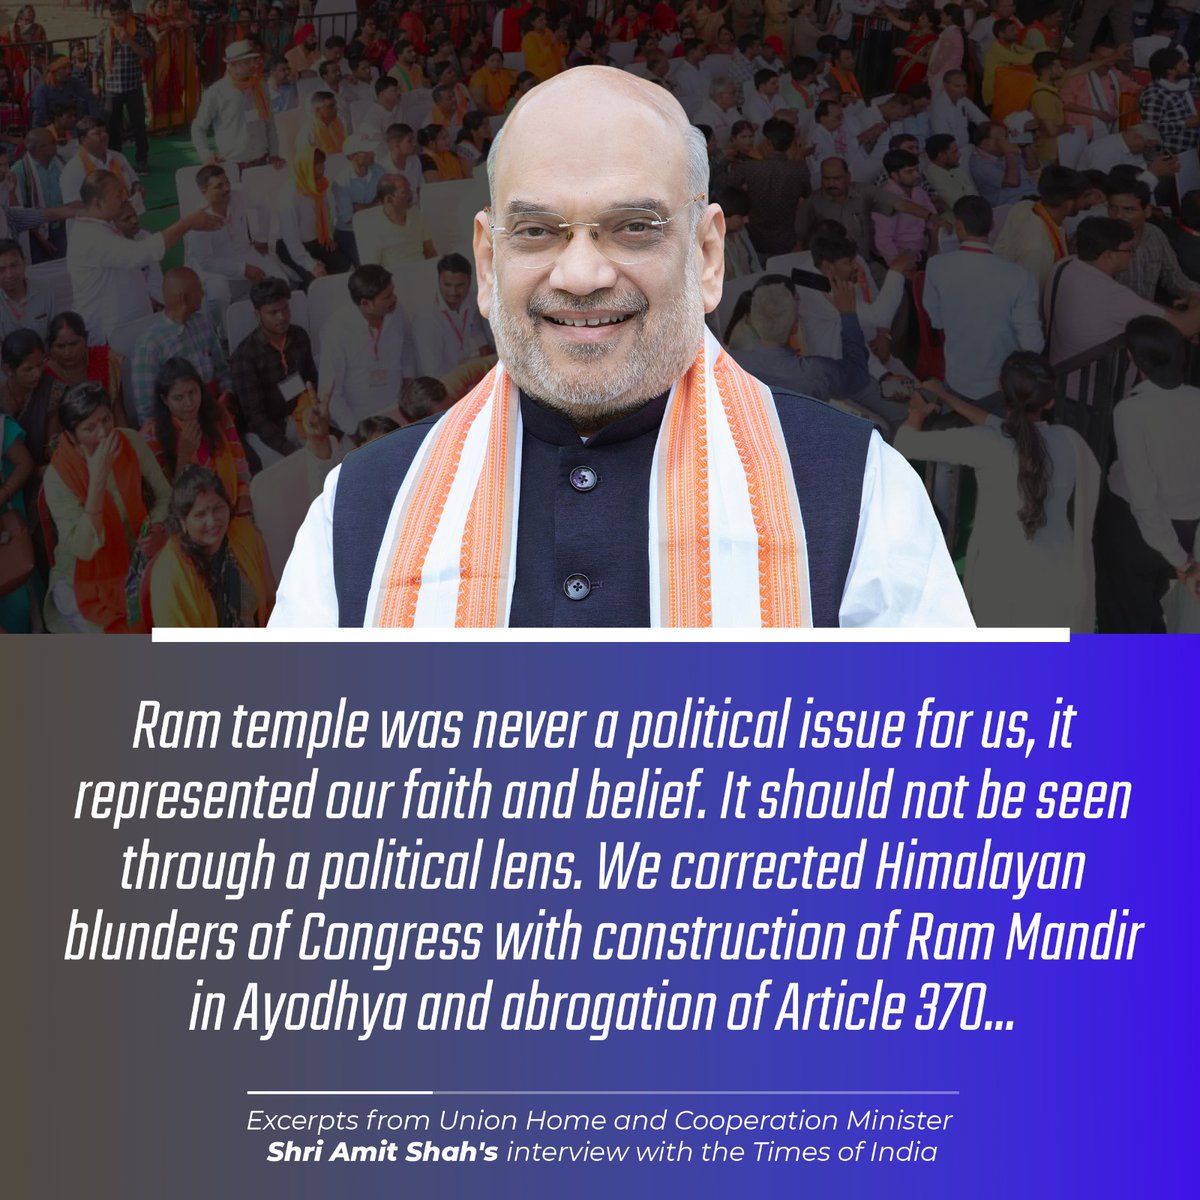 Ram temple was never a political issue for us, it represented our faith and belief.

- Shri @AmitShah